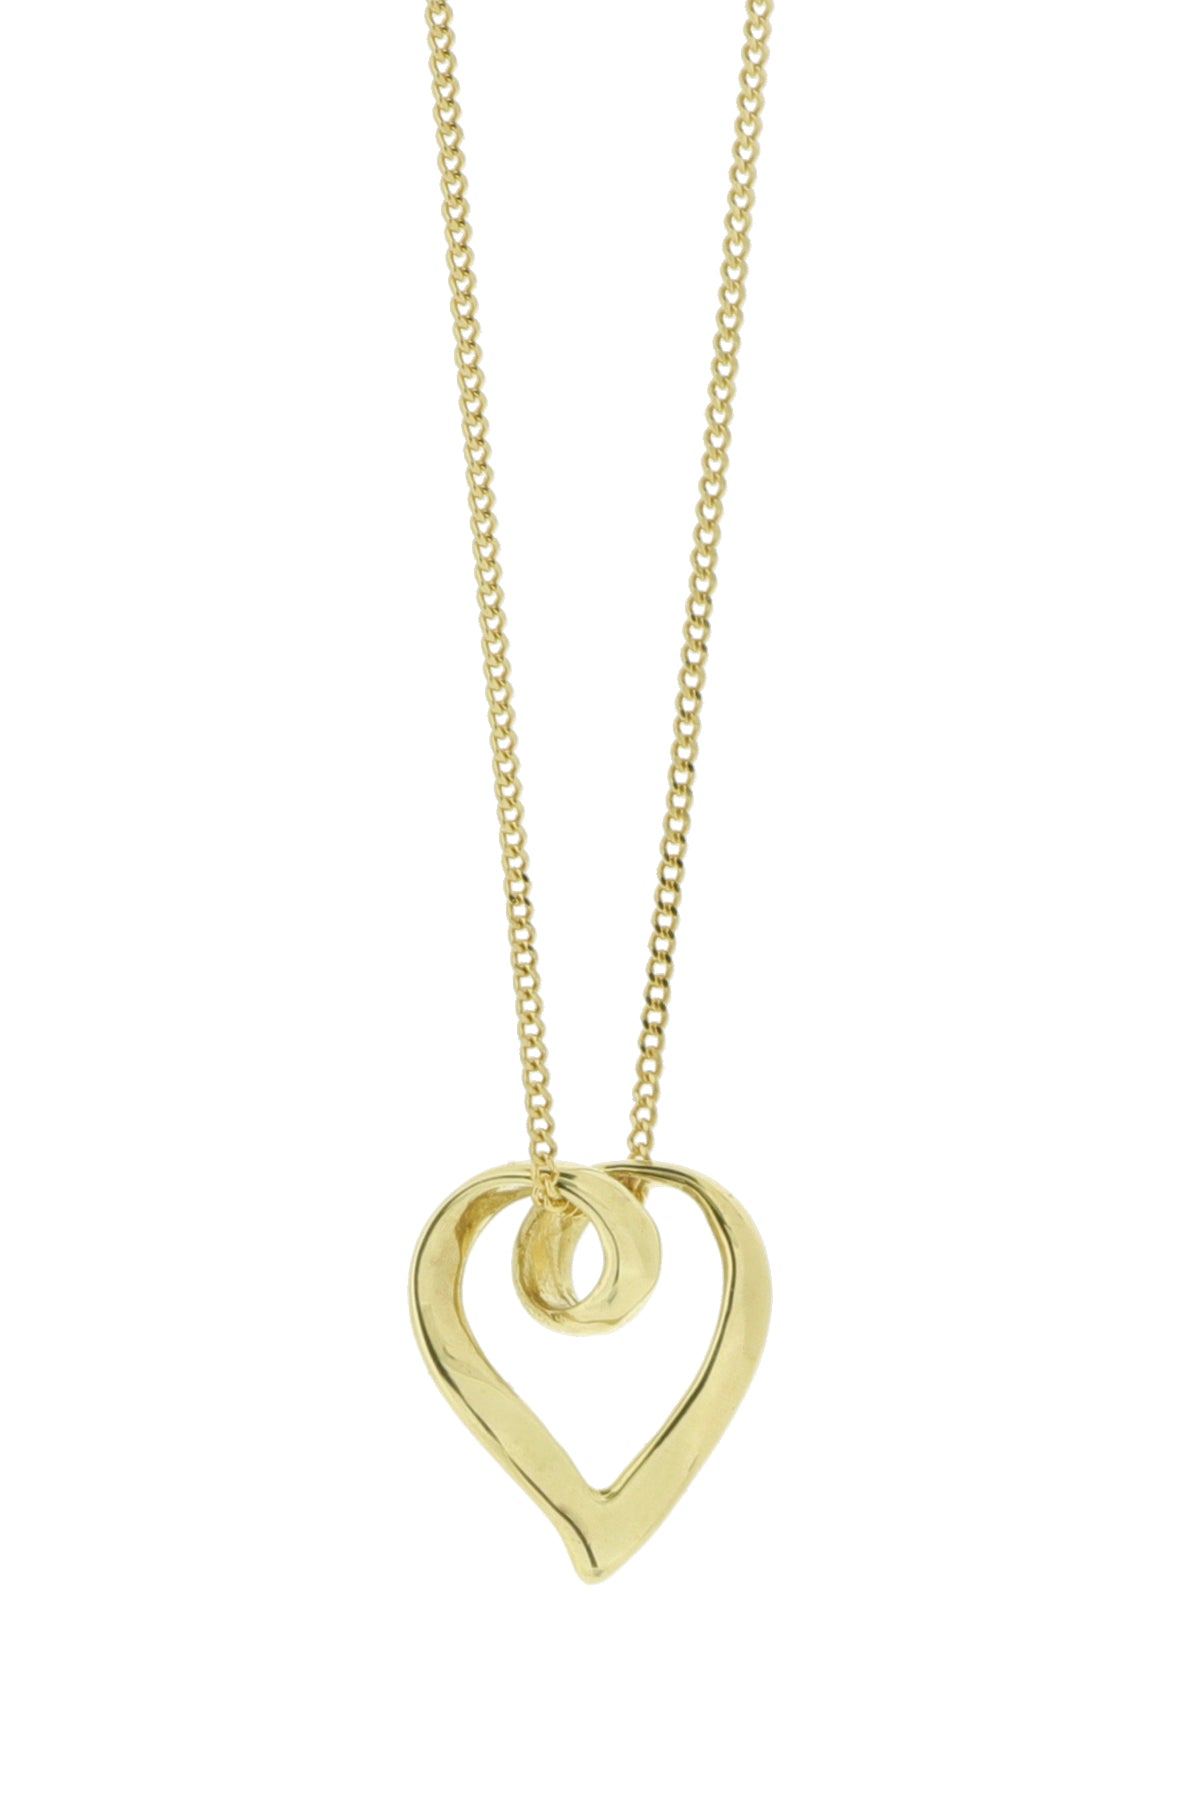 9ct Gold Heart Necklace | Second Hand Ladies Jewellery | Cash For Gold